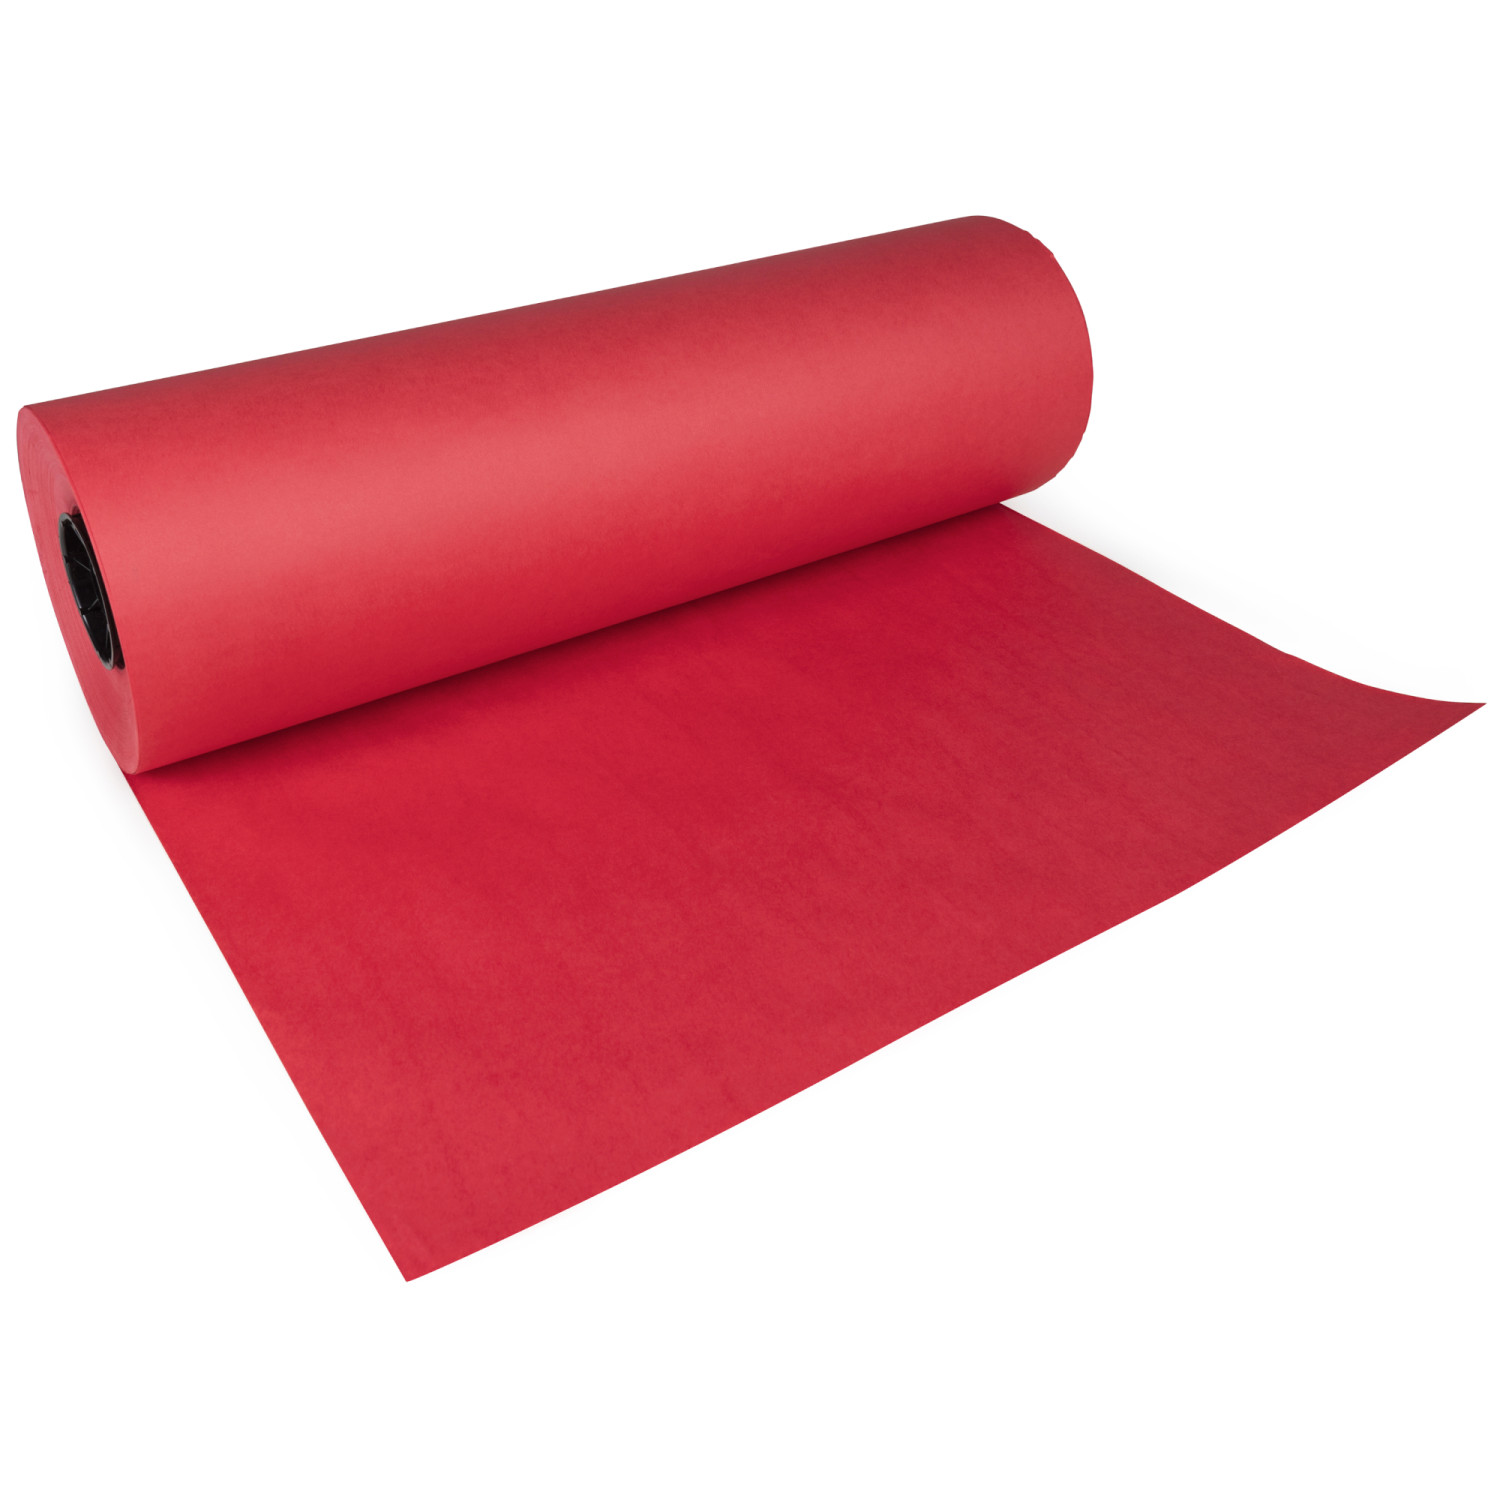  Kraft Paper Roll, 12 x 100Ft Recycled Kraft Paper Red